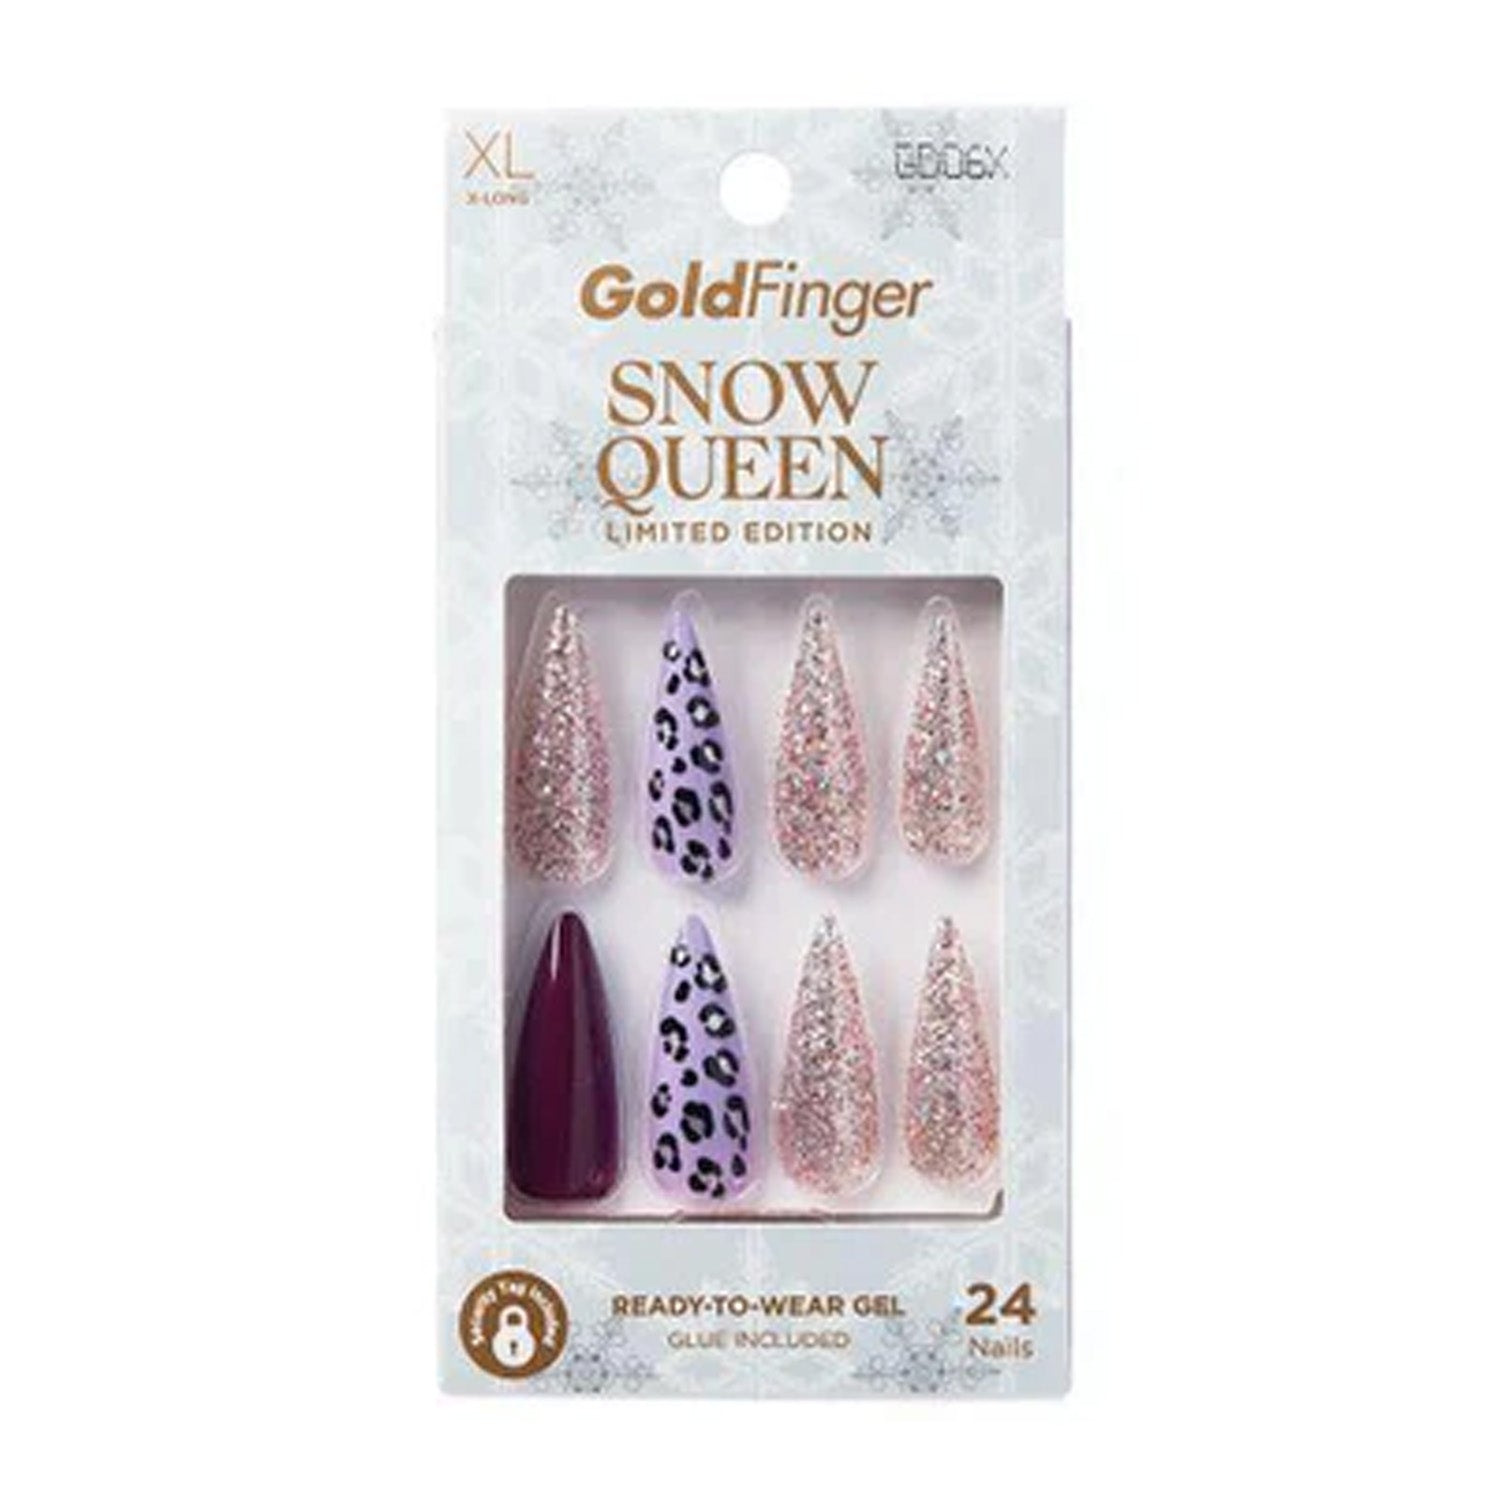 GOLDFINGER SNOW QUEEN LIMITED EDITION LET'S BE NAUGHTY #GD06X